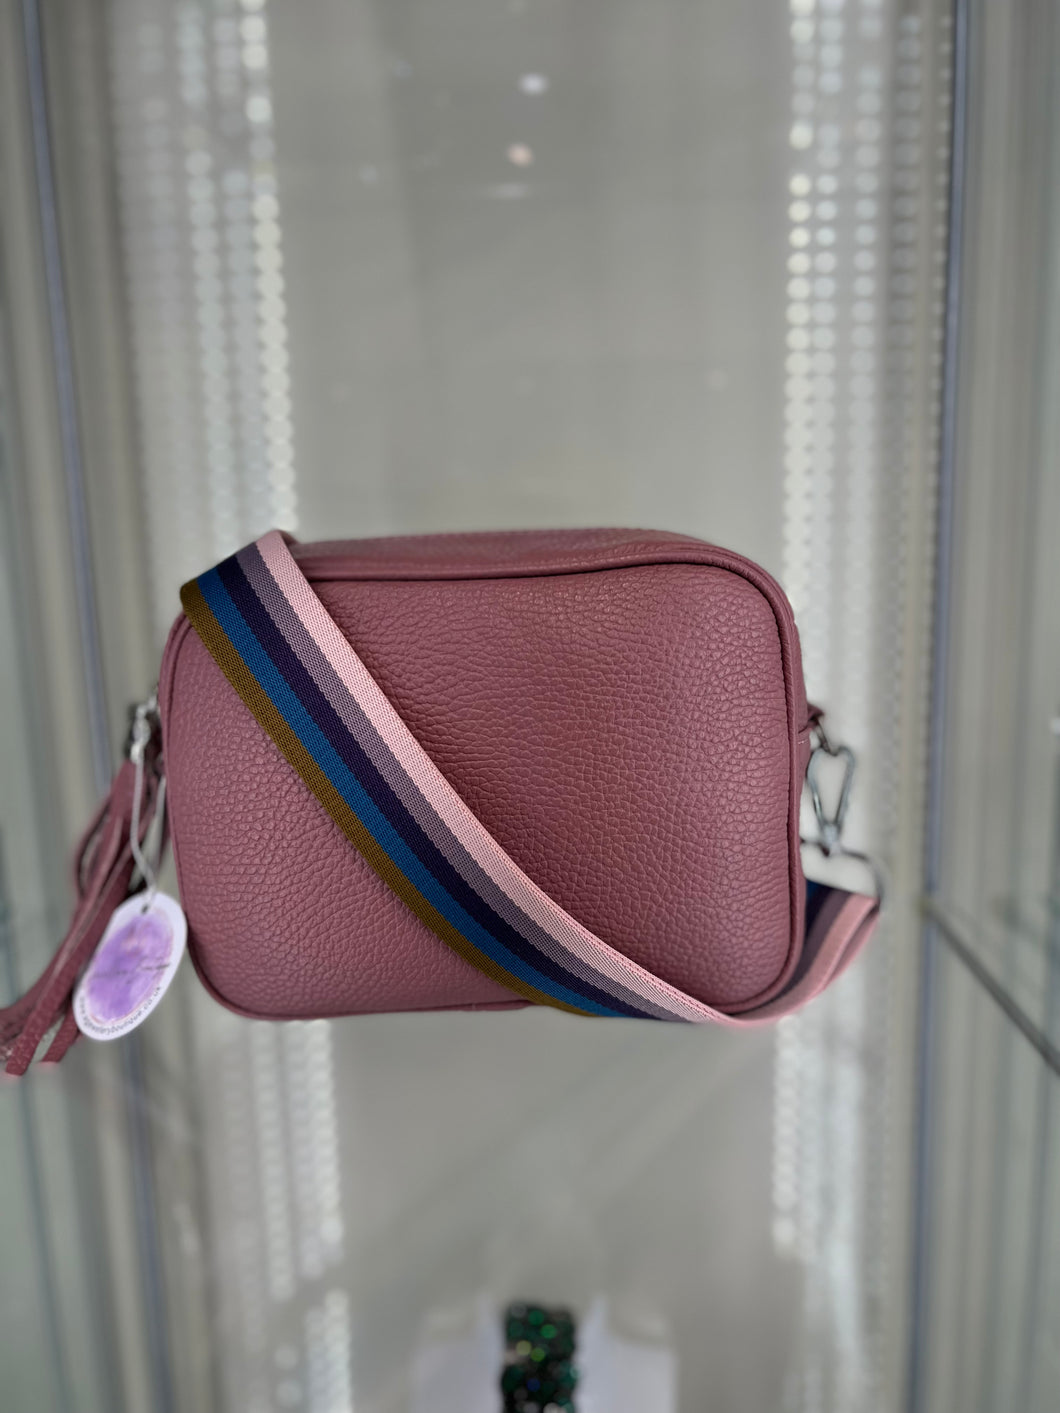 Real Leather Pink Handbag with Striped Strap